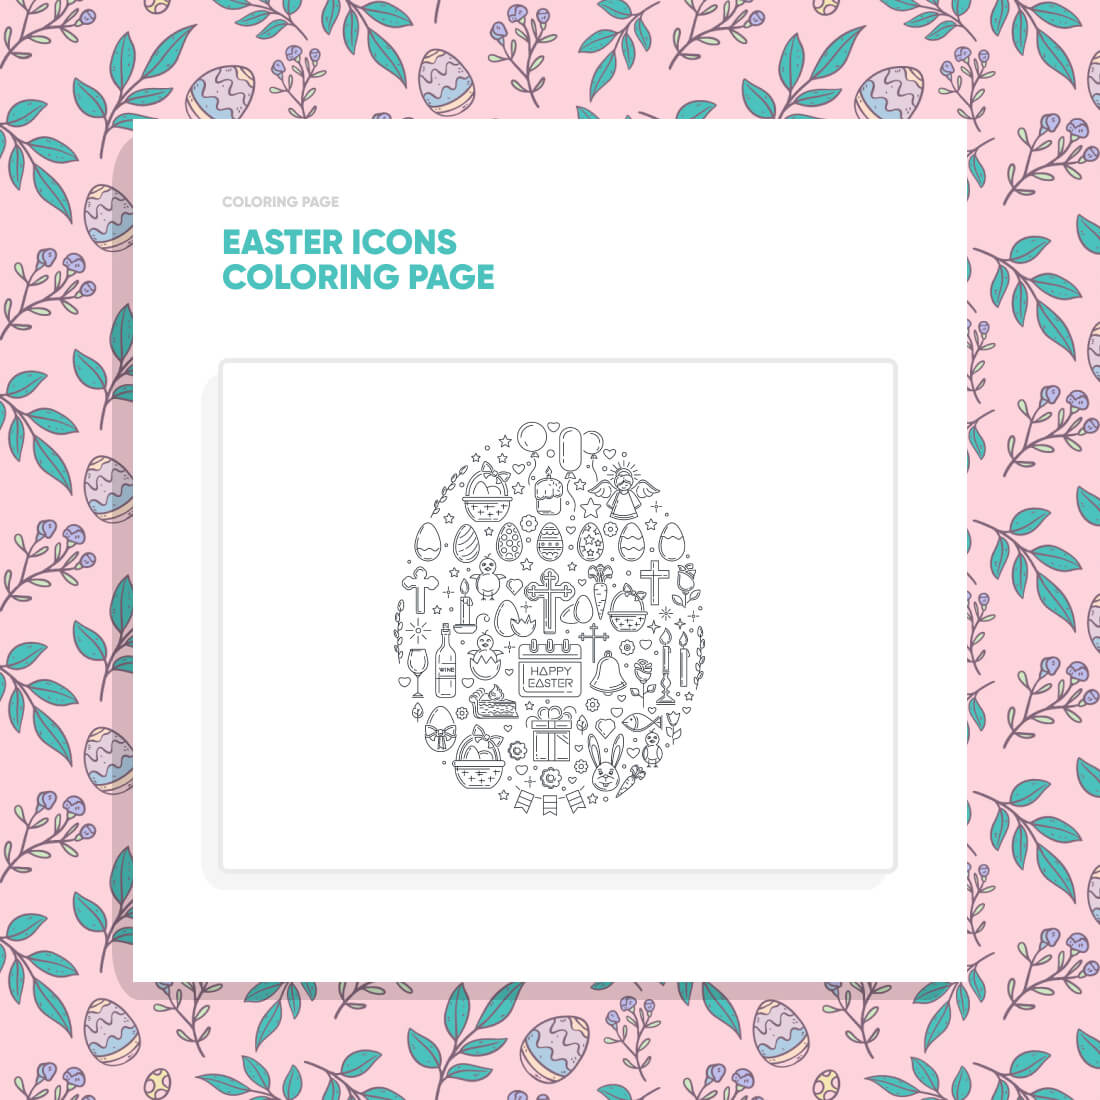 Easter Icons Coloring Page cover image.